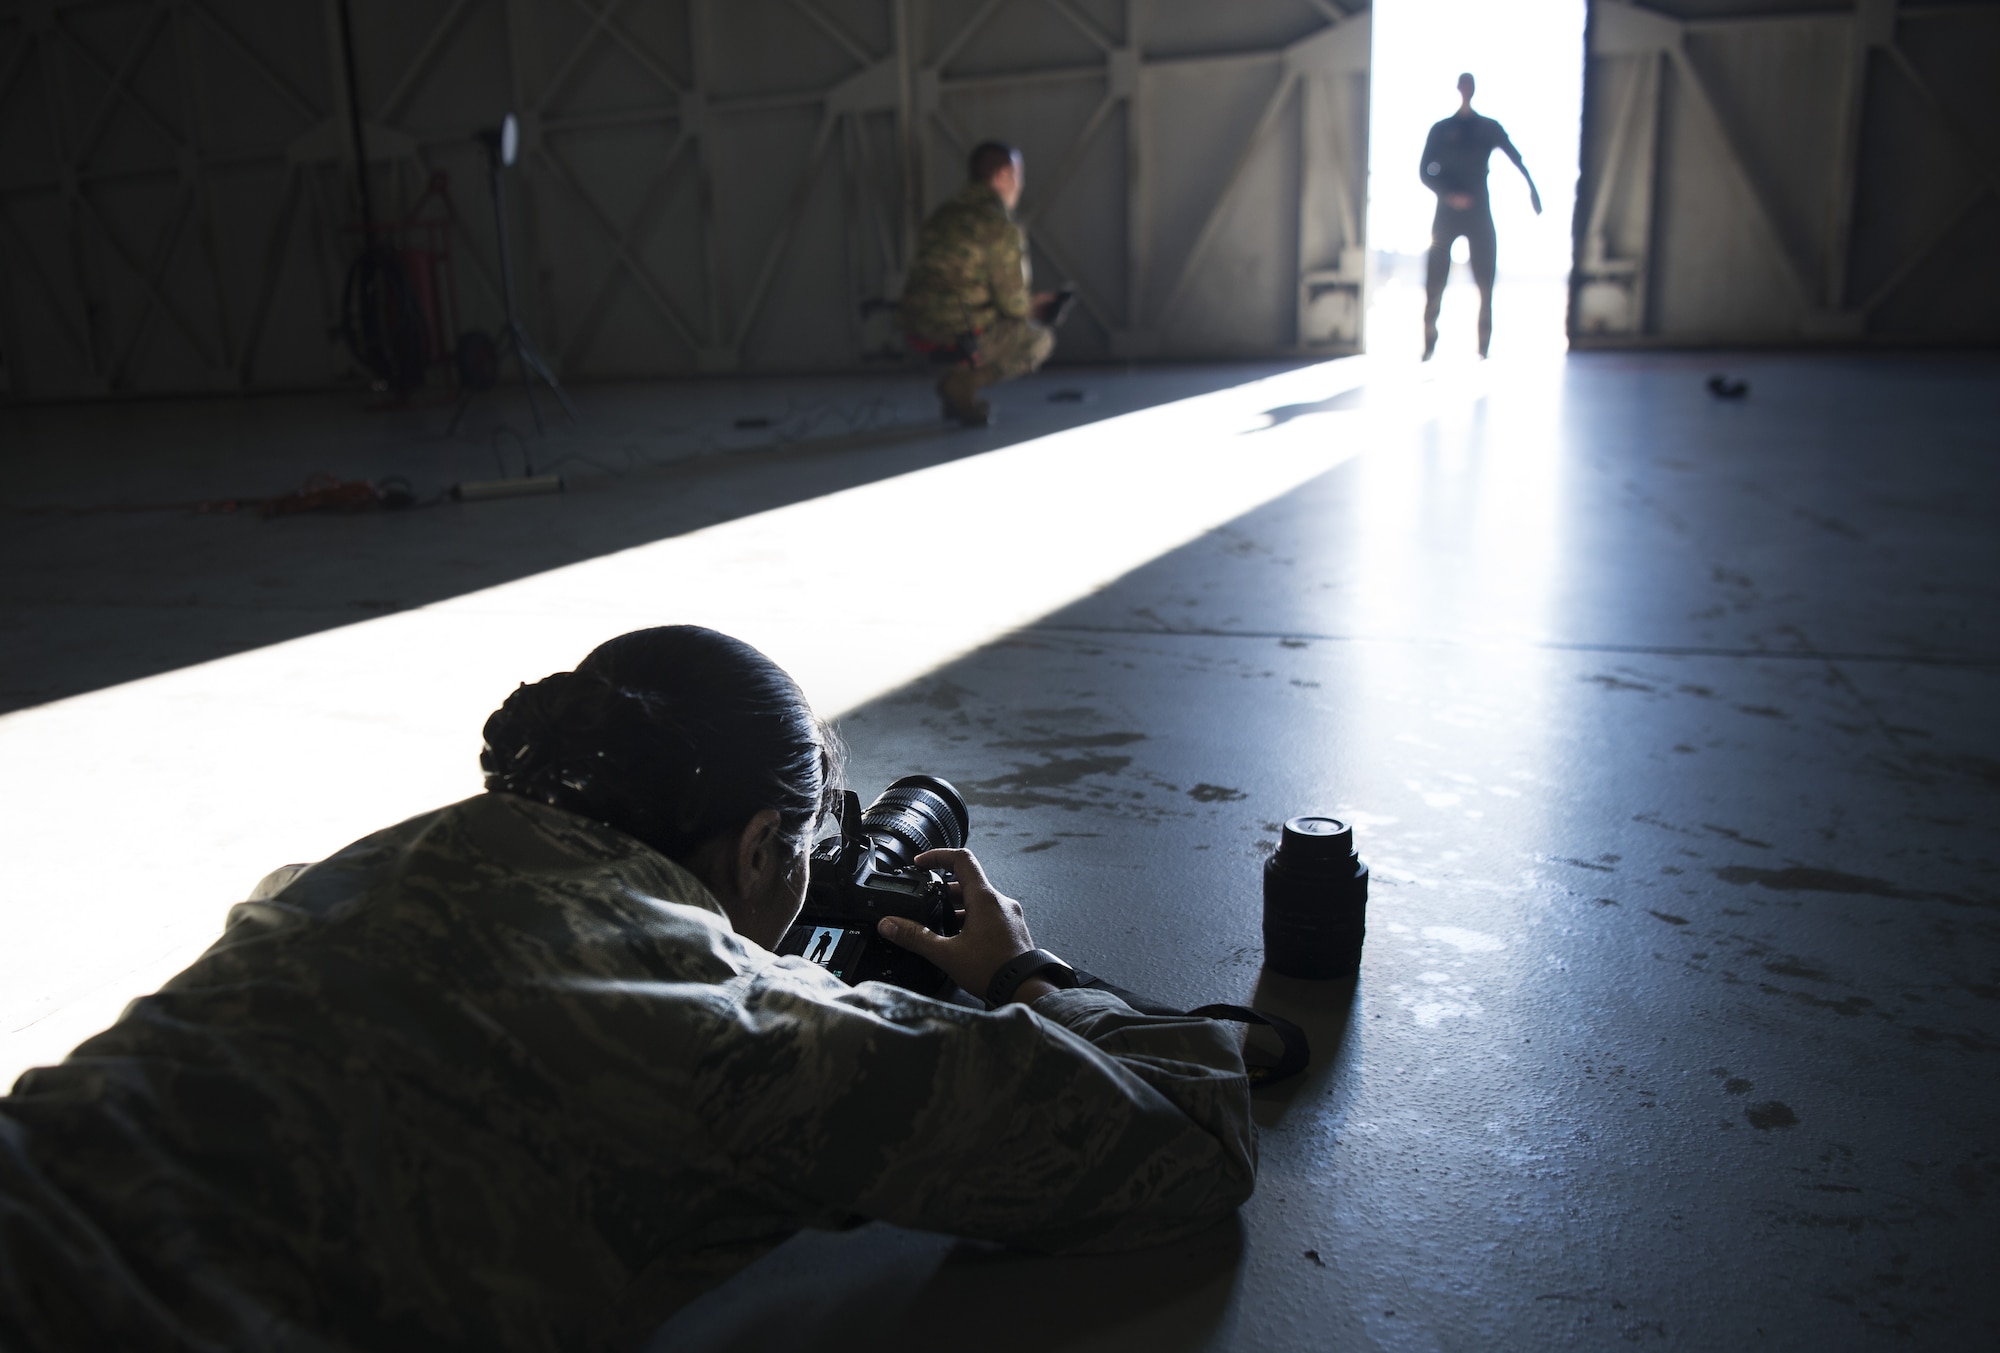 U.S. Air Force Senior Airman Kathryn Reaves, 20th Fighter Wing photojournalist, sets a photo illustration at Shaw Air Force Base, S.C., Jan. 25, 2019.